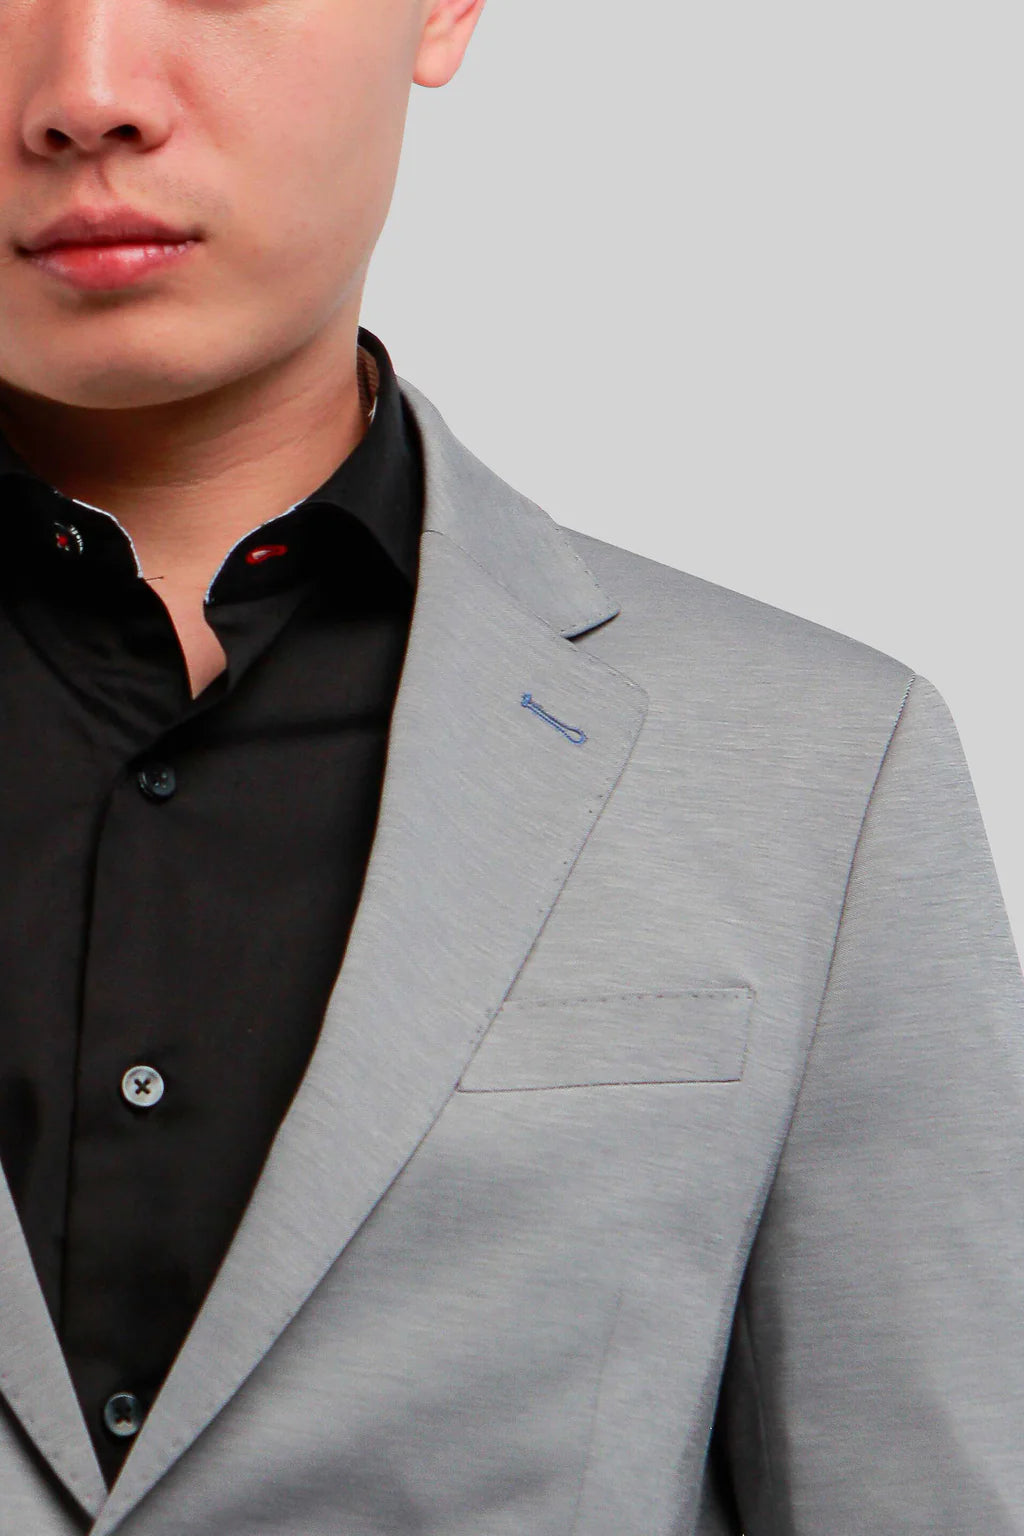 Sporty enough to wear with a t-shirt or knit, and dressy enough to wear with a woven shirt; this blazer breaks the mold of a traditional black jacket. 